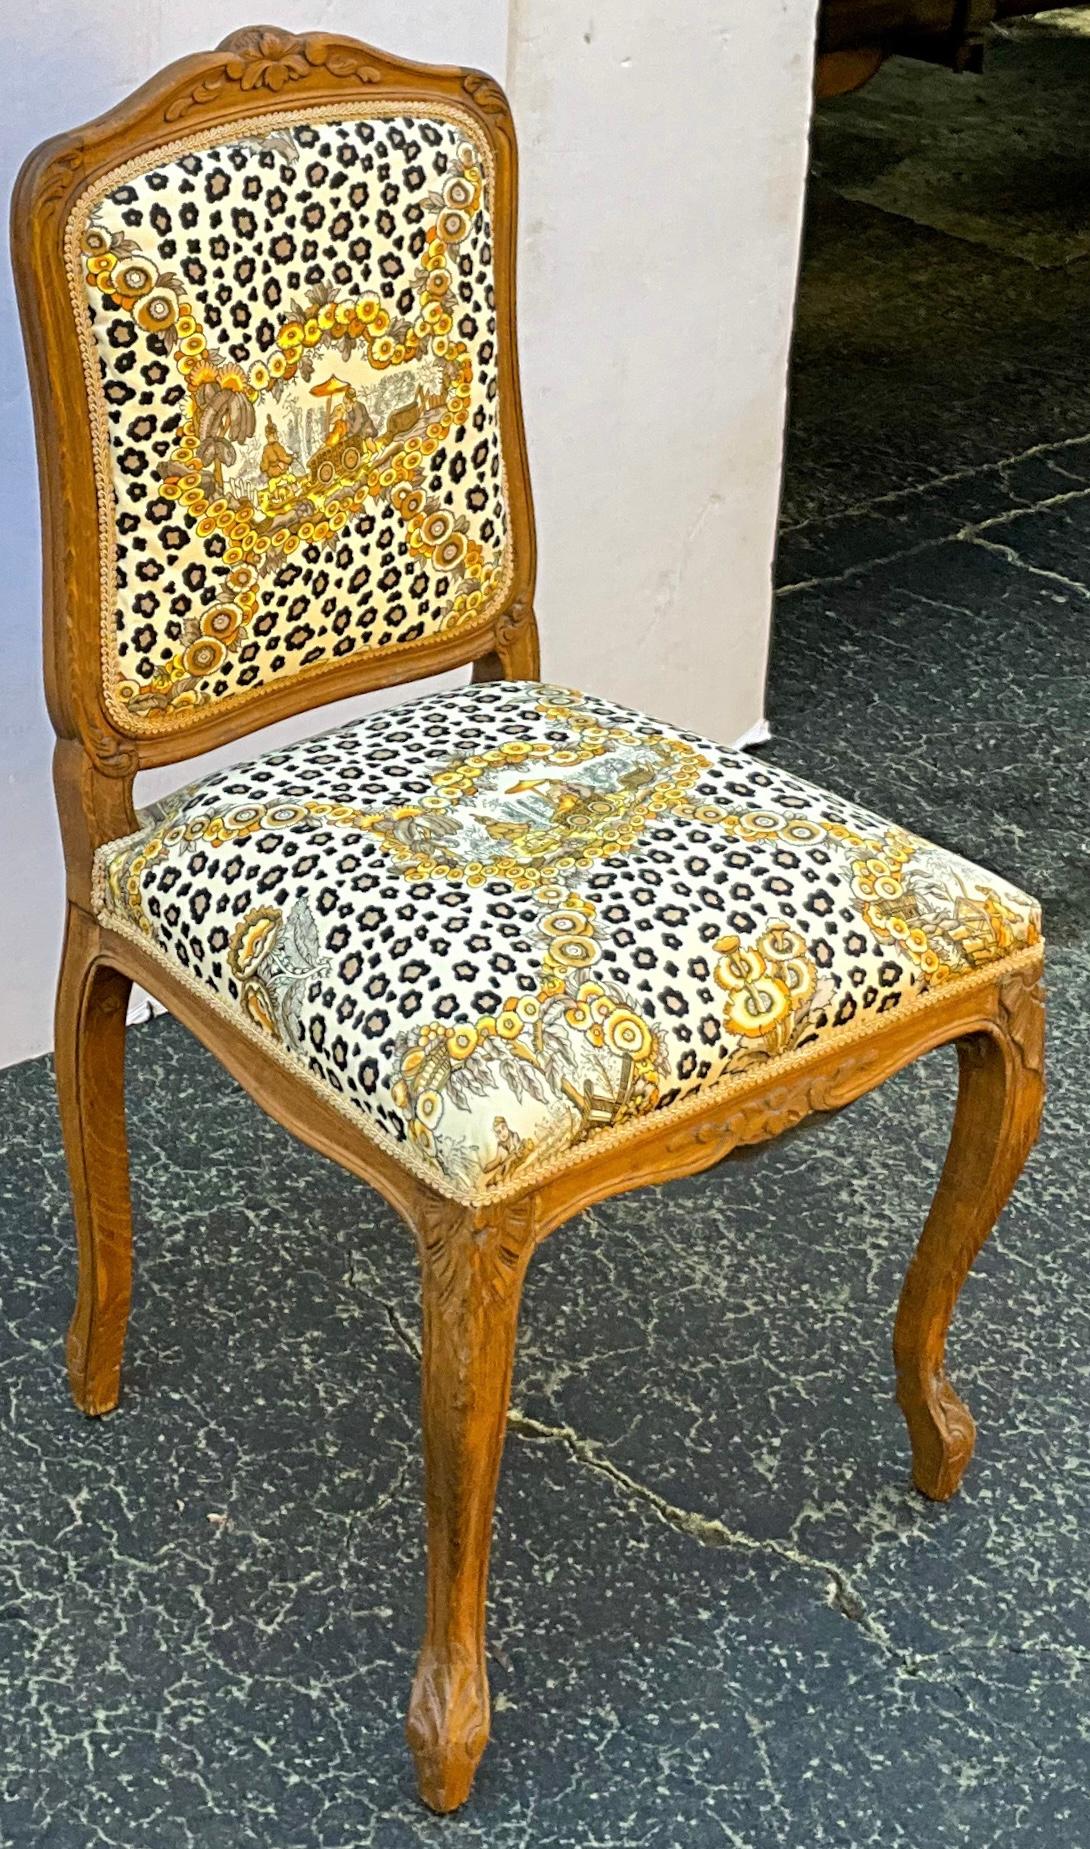 1950s French Carved Oak Chair in Brunschwig & Fils Chinoiserie Leopard Fabric In Good Condition For Sale In Kennesaw, GA